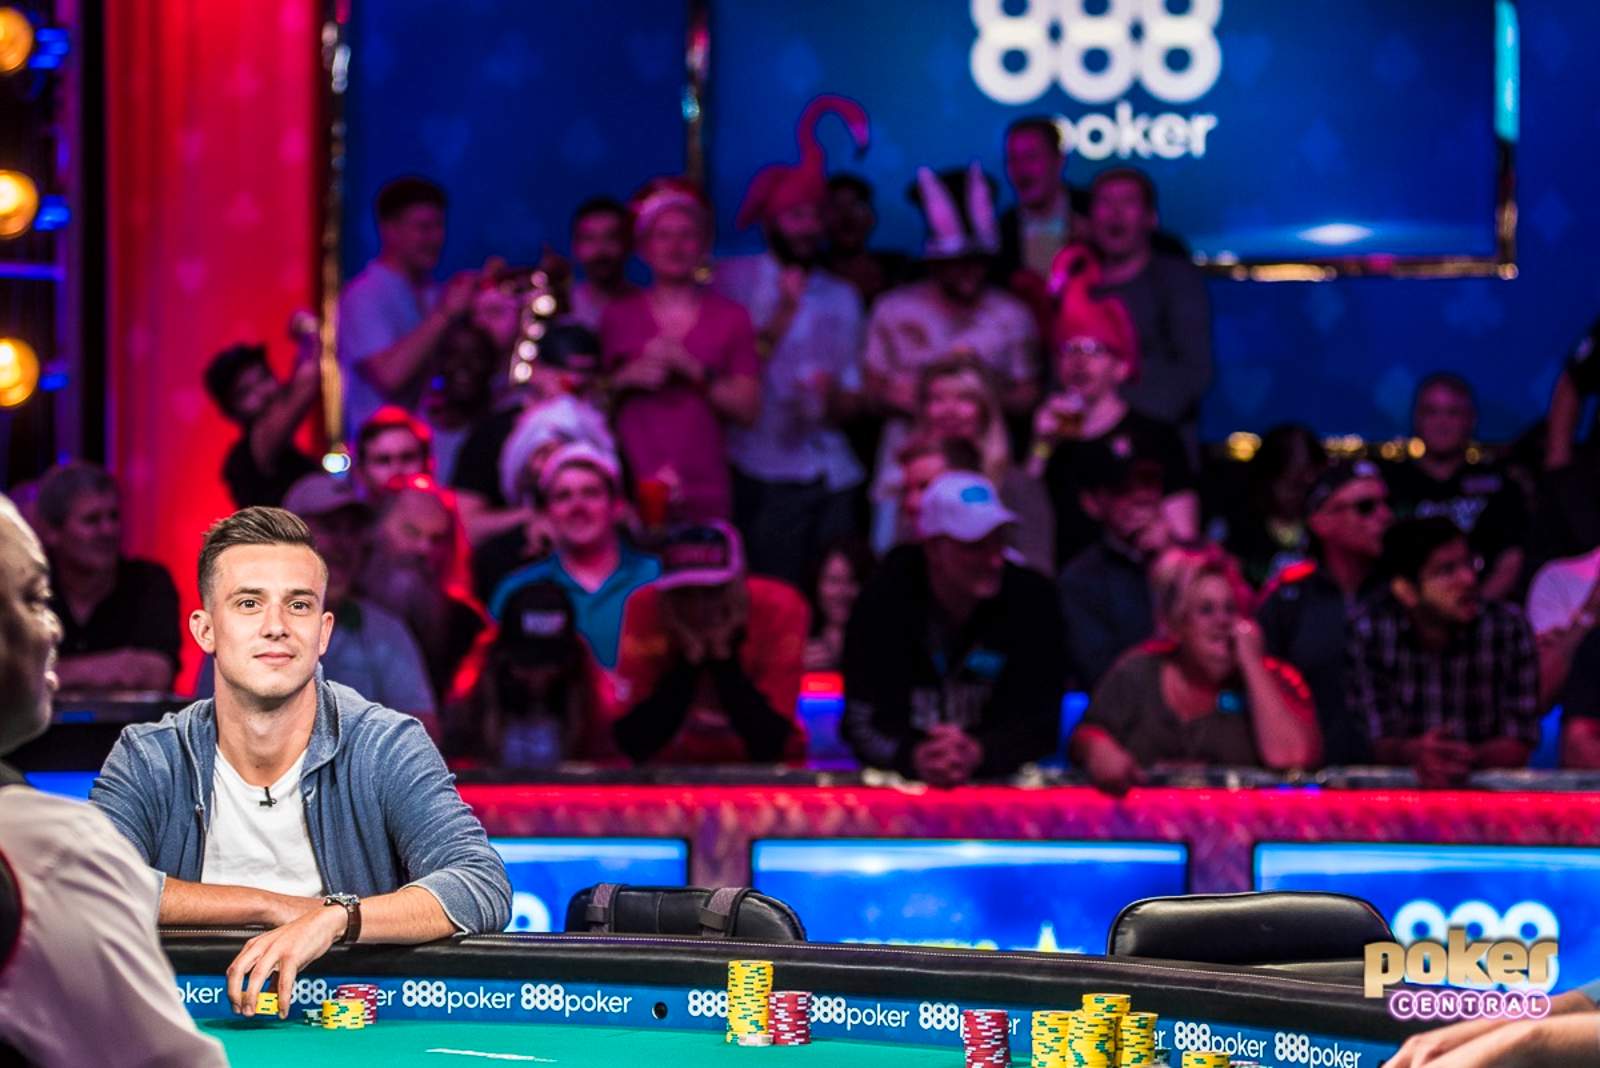 47 Hands of Misery: Alex Lynskey's WSOP Main Event Final Table